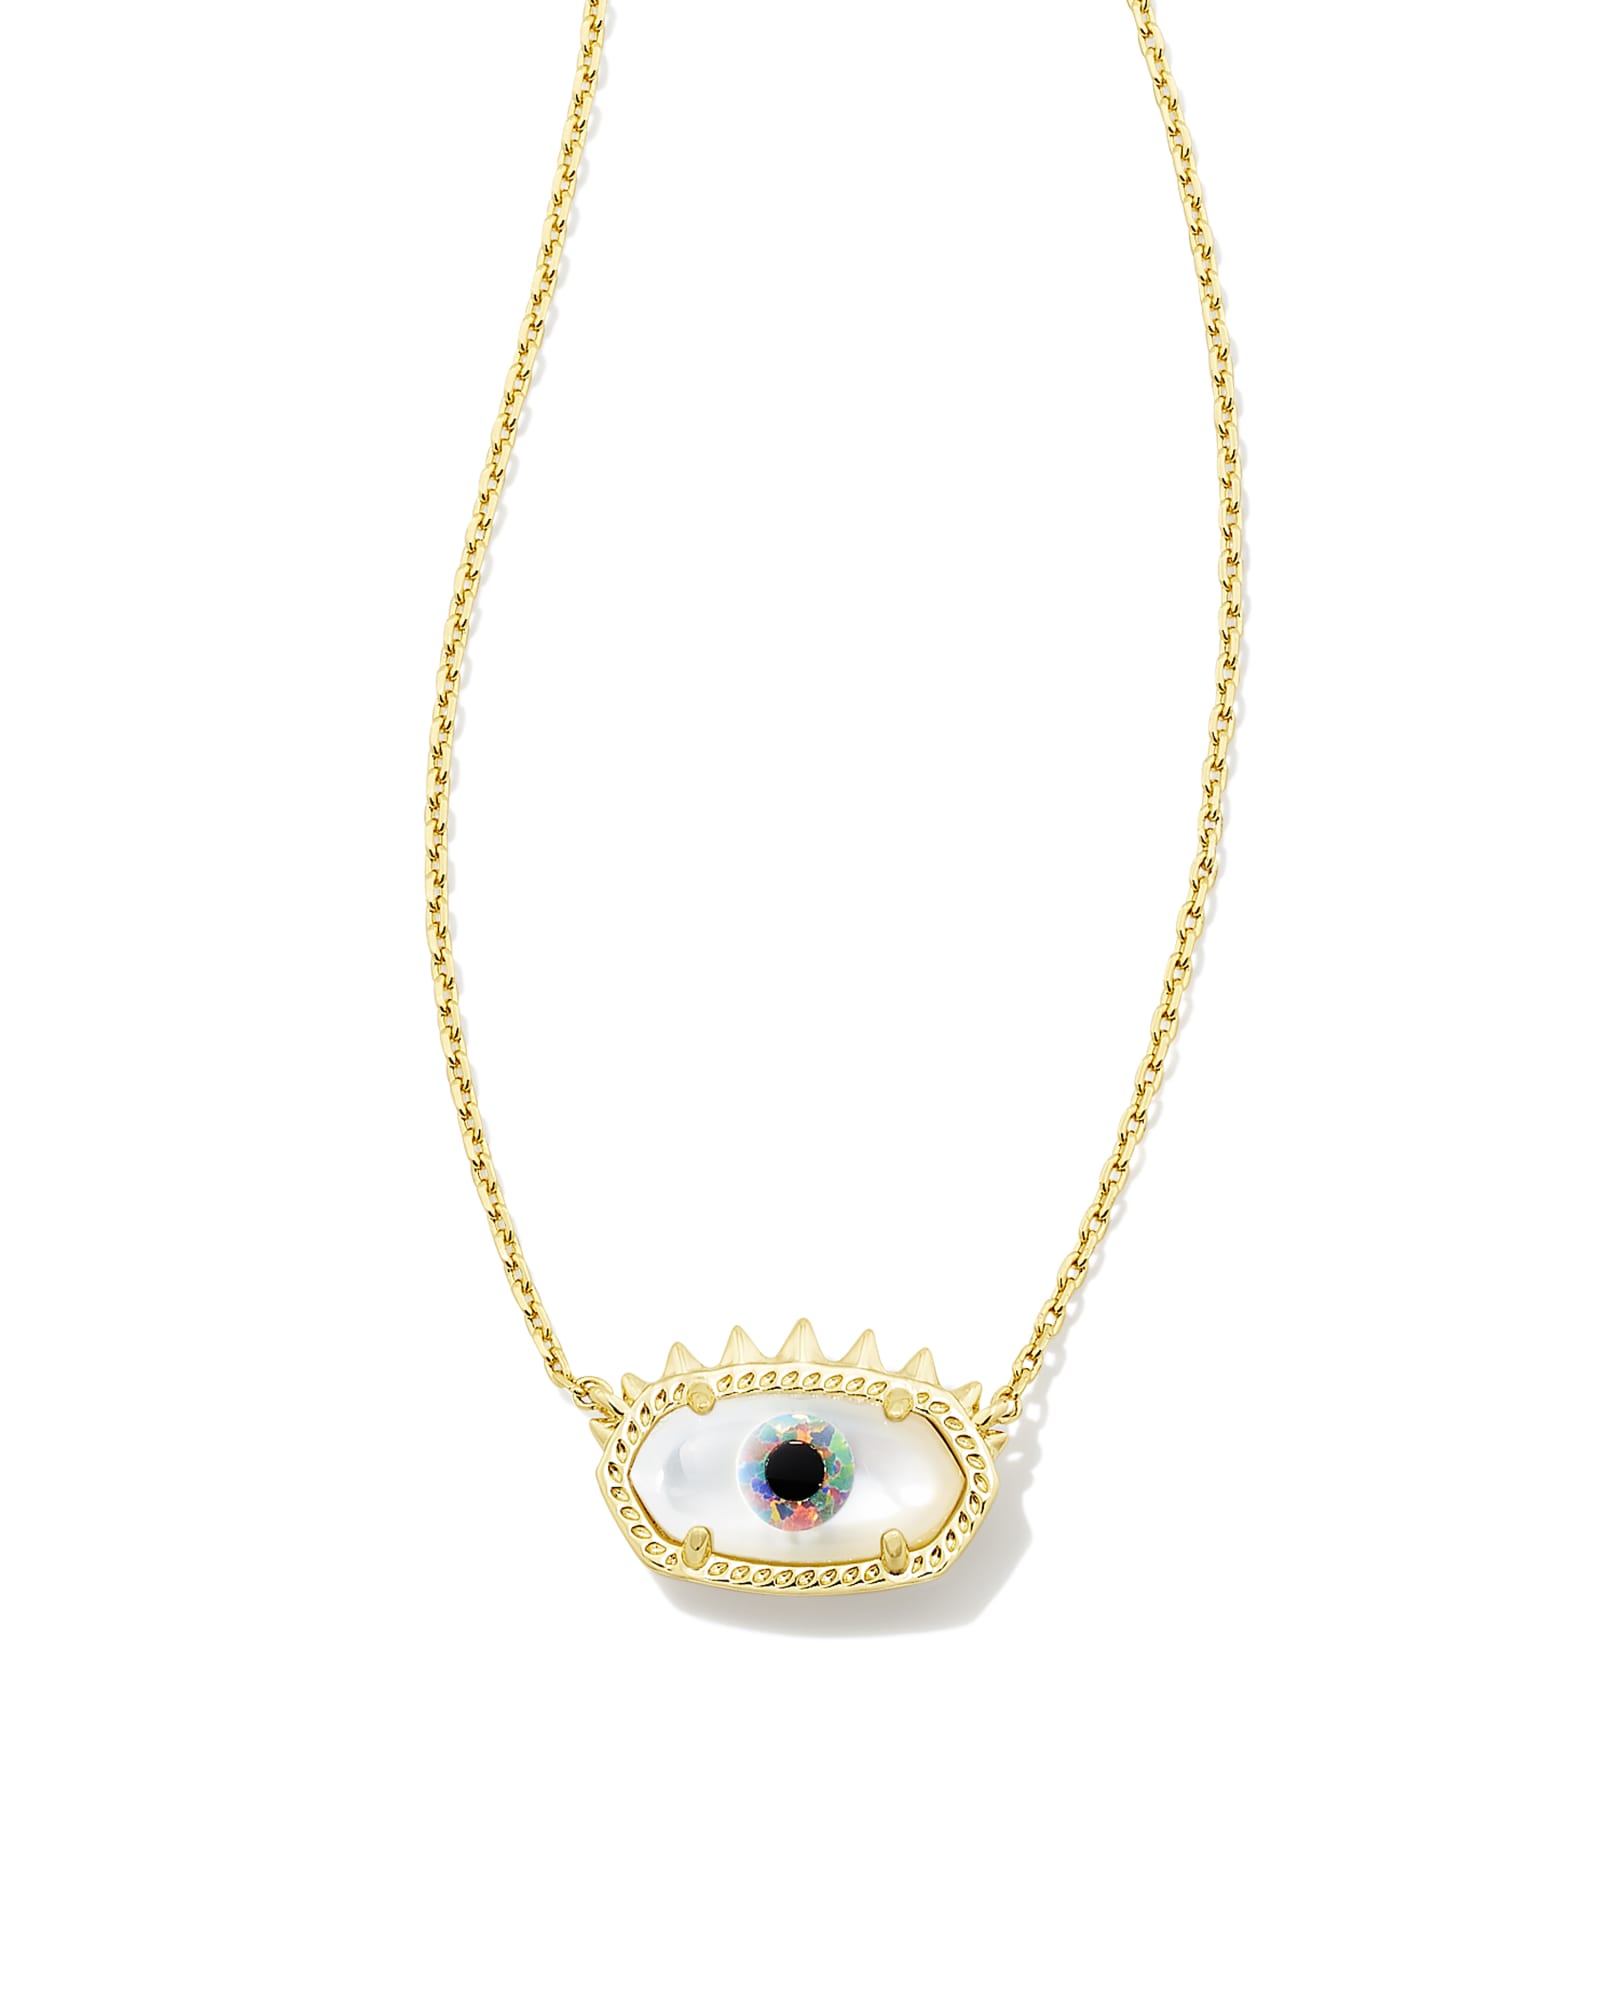 Kendra Scott Elisa Evil Eye Gold Short Pendant Necklace in Ivory Mother-of-Pearl | Mother Of Pearl